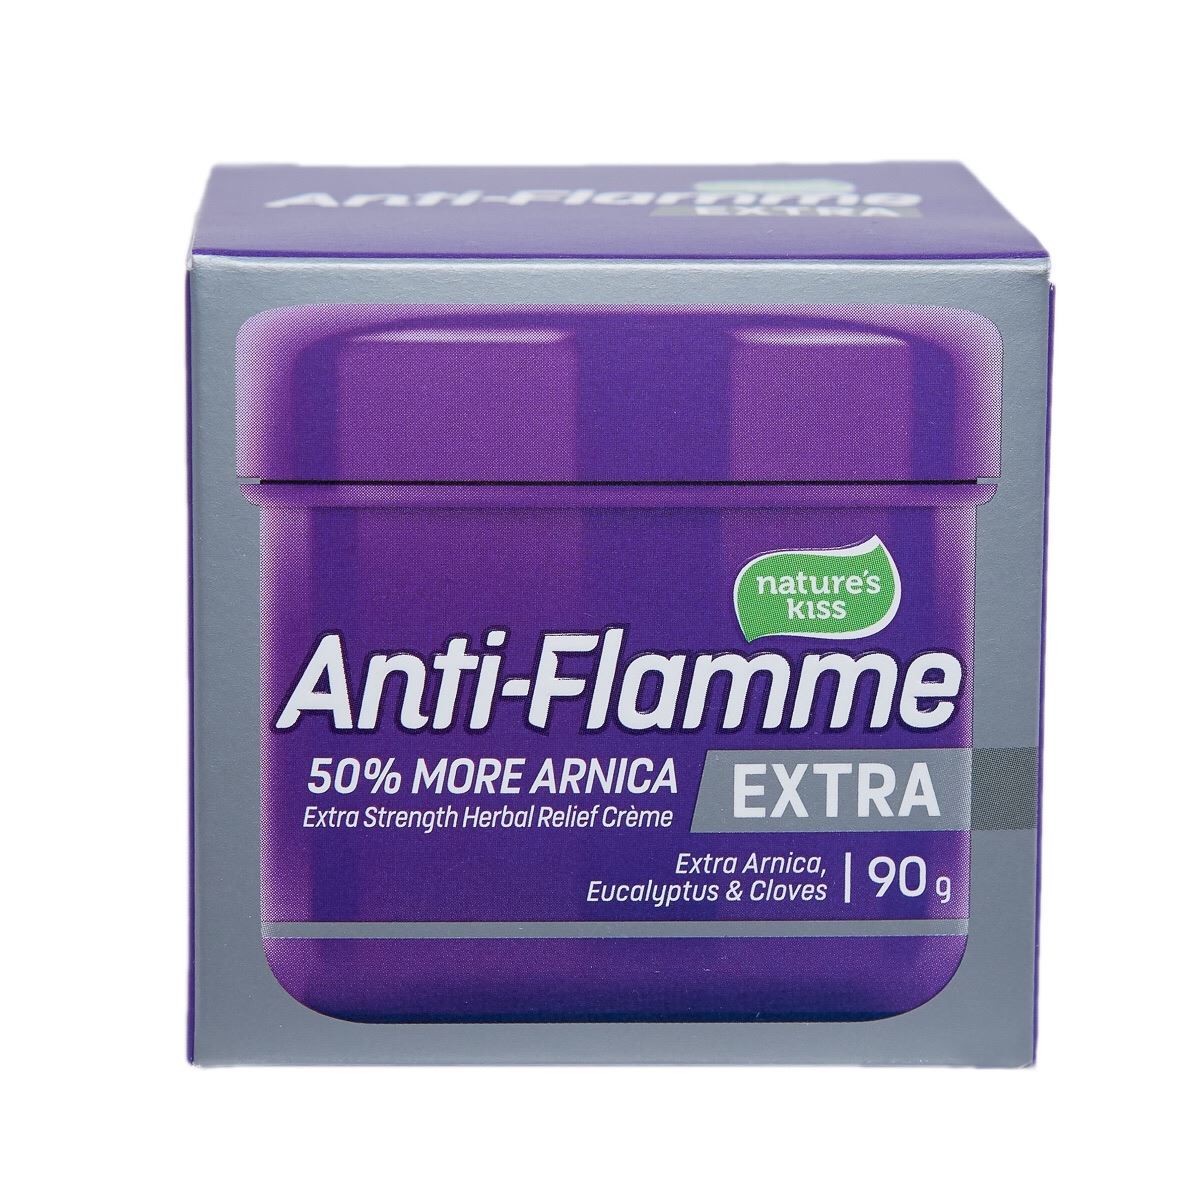 Anti-Flamme Extra Herbal Relief Crème 90g